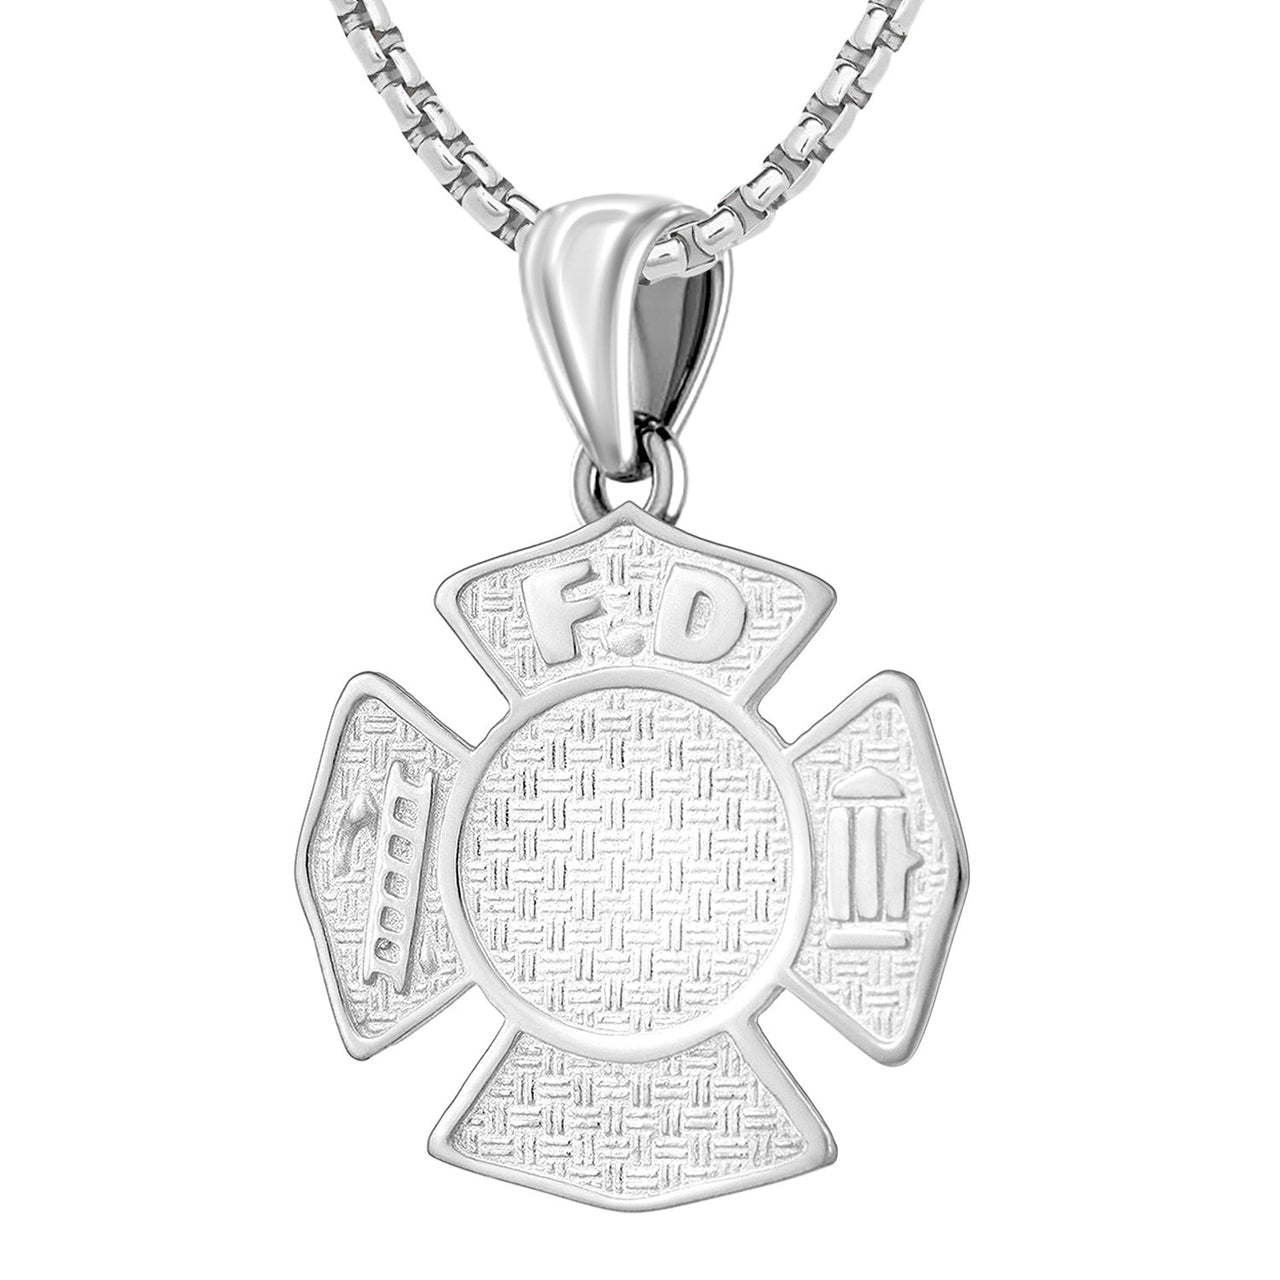 Firefighter Necklace In 925 Silver for Men - 1mm Box Chain